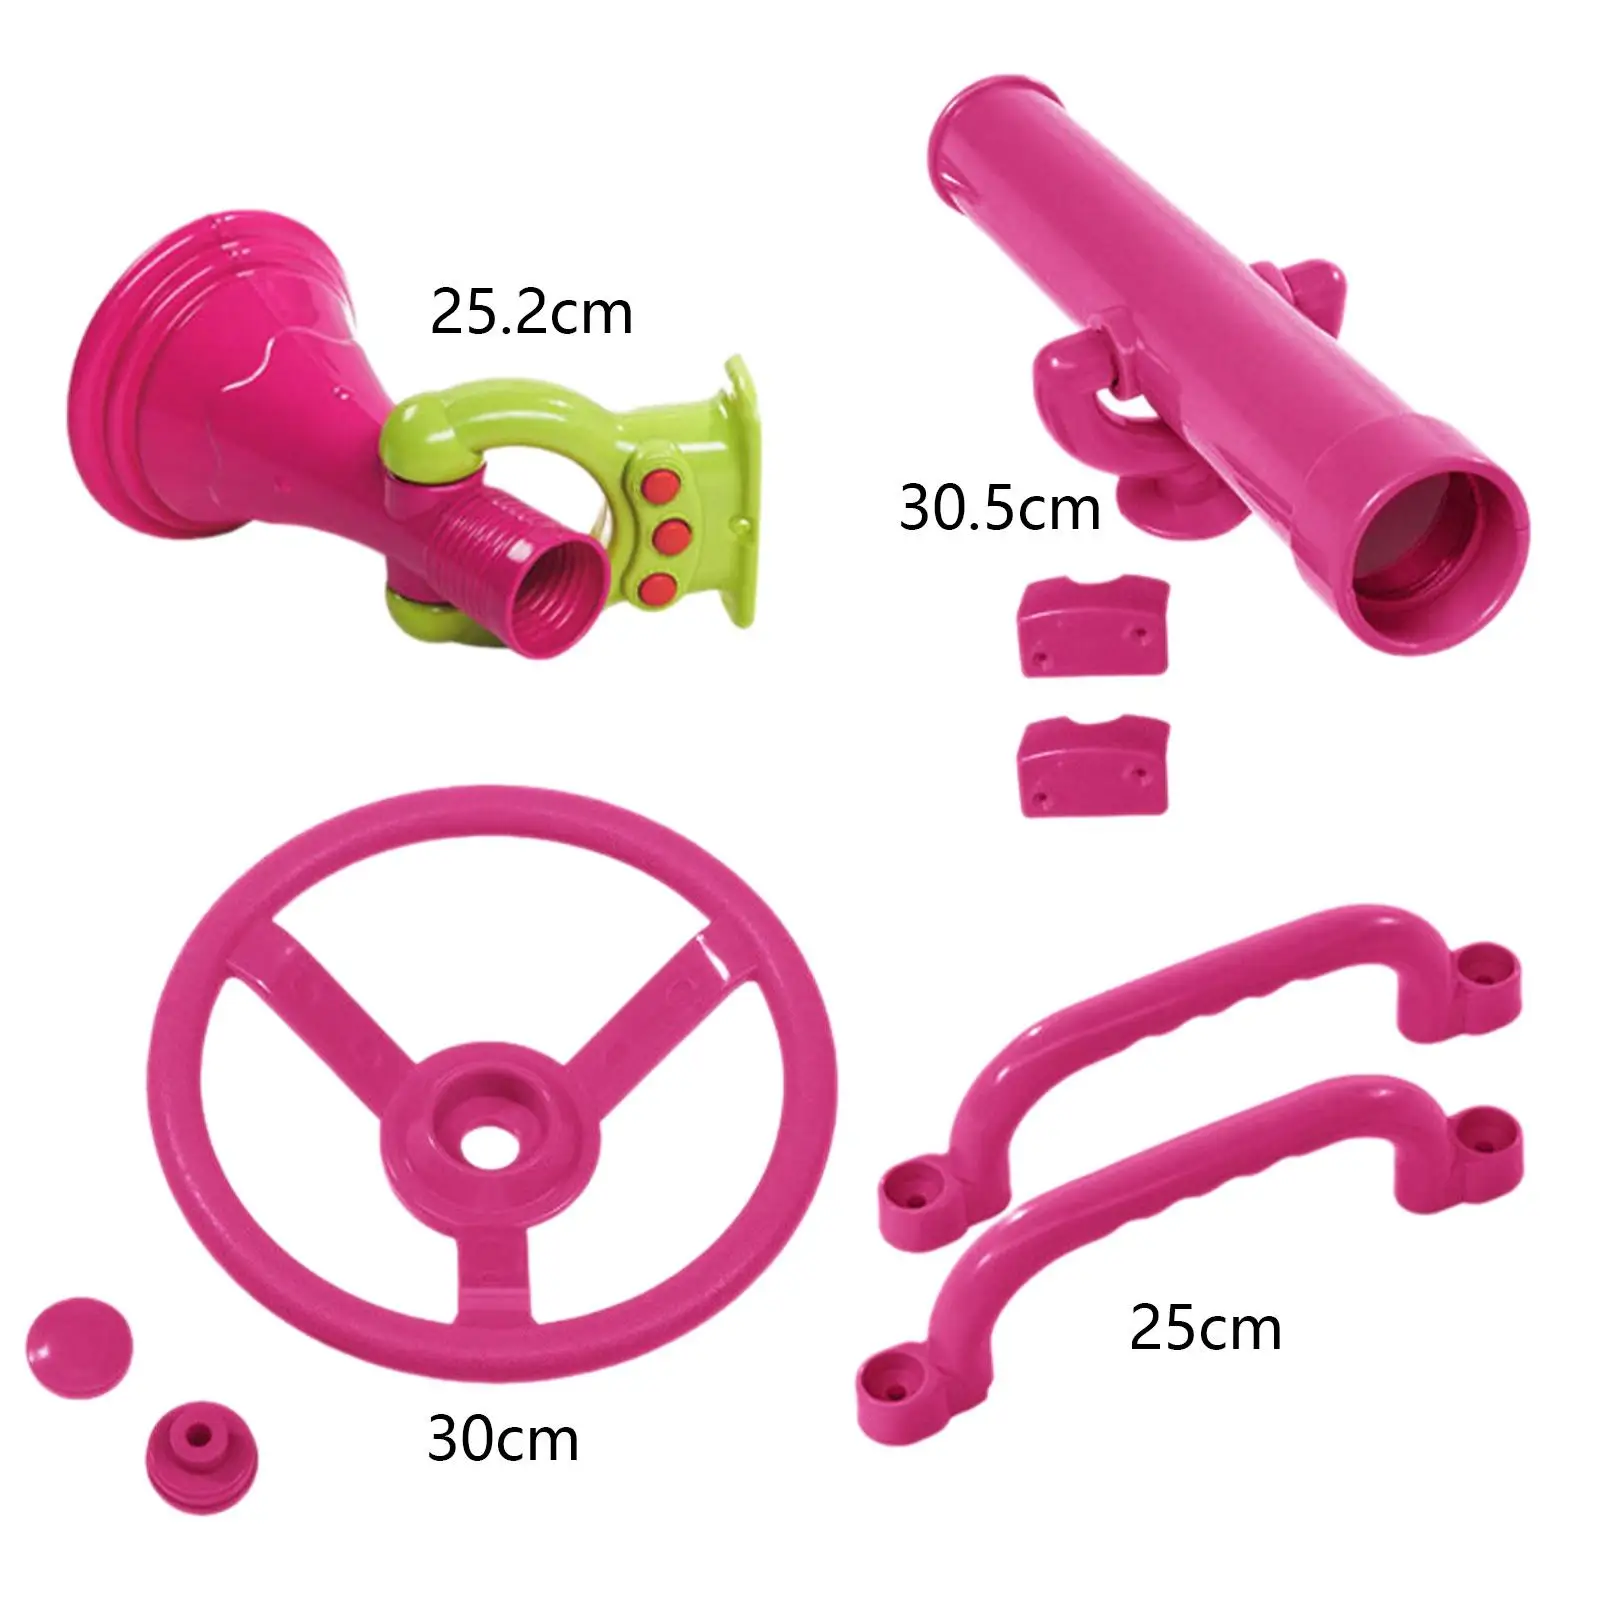 4 Pieces Playground Accessories Swingset Attachments Pink Pirate Telescope Pirate Ship Wheel for Kids for Backyard Swingset